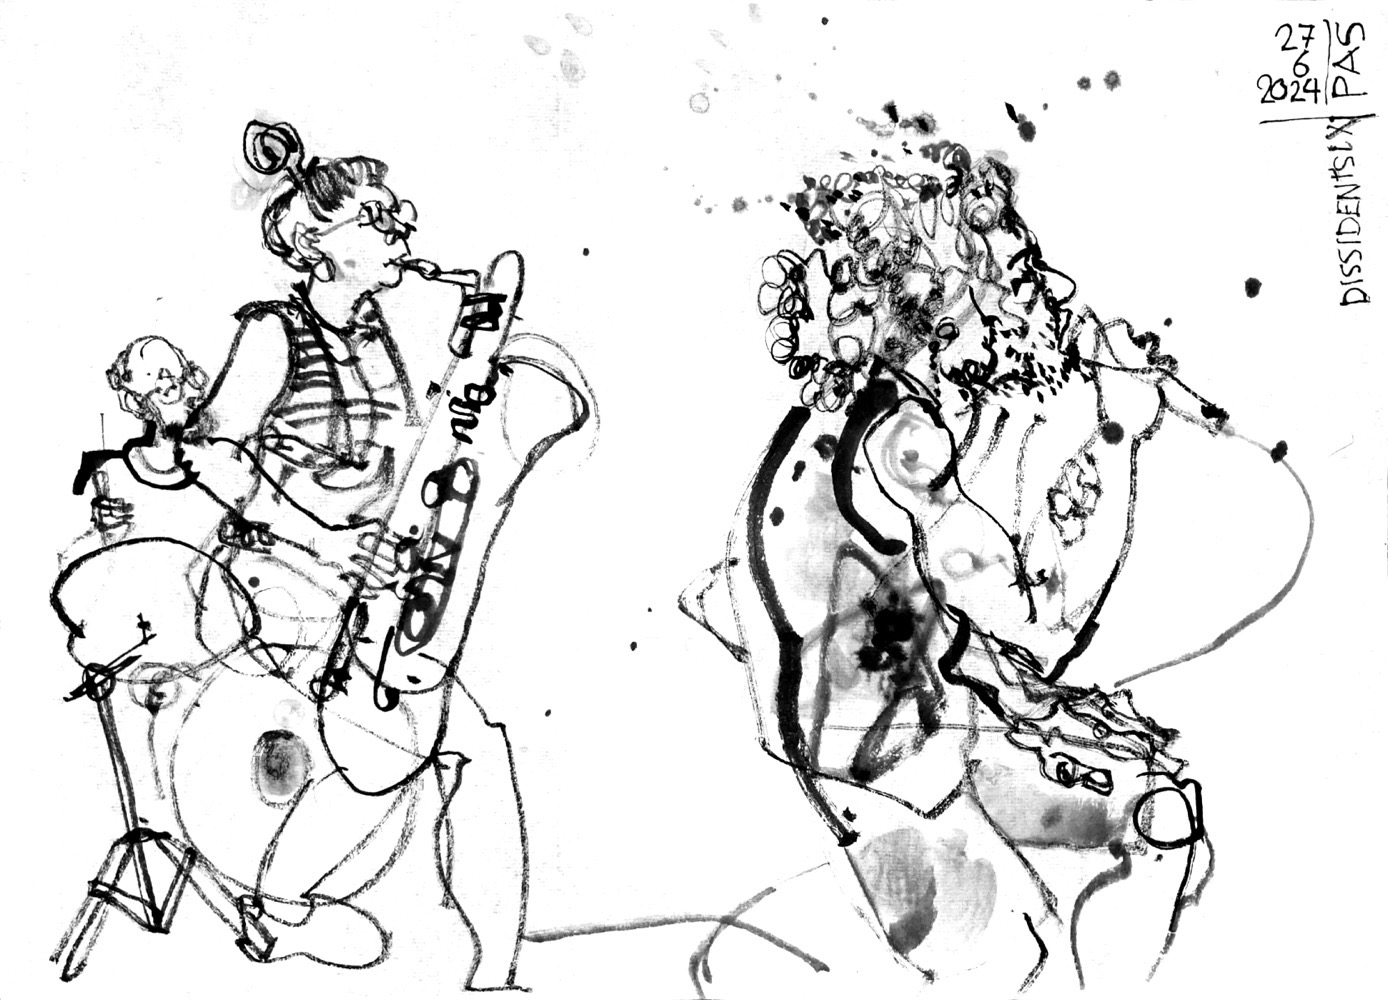 Ink drawing of three musicians, a male drummer, a woman on baritone saxophone and a male vocalist.